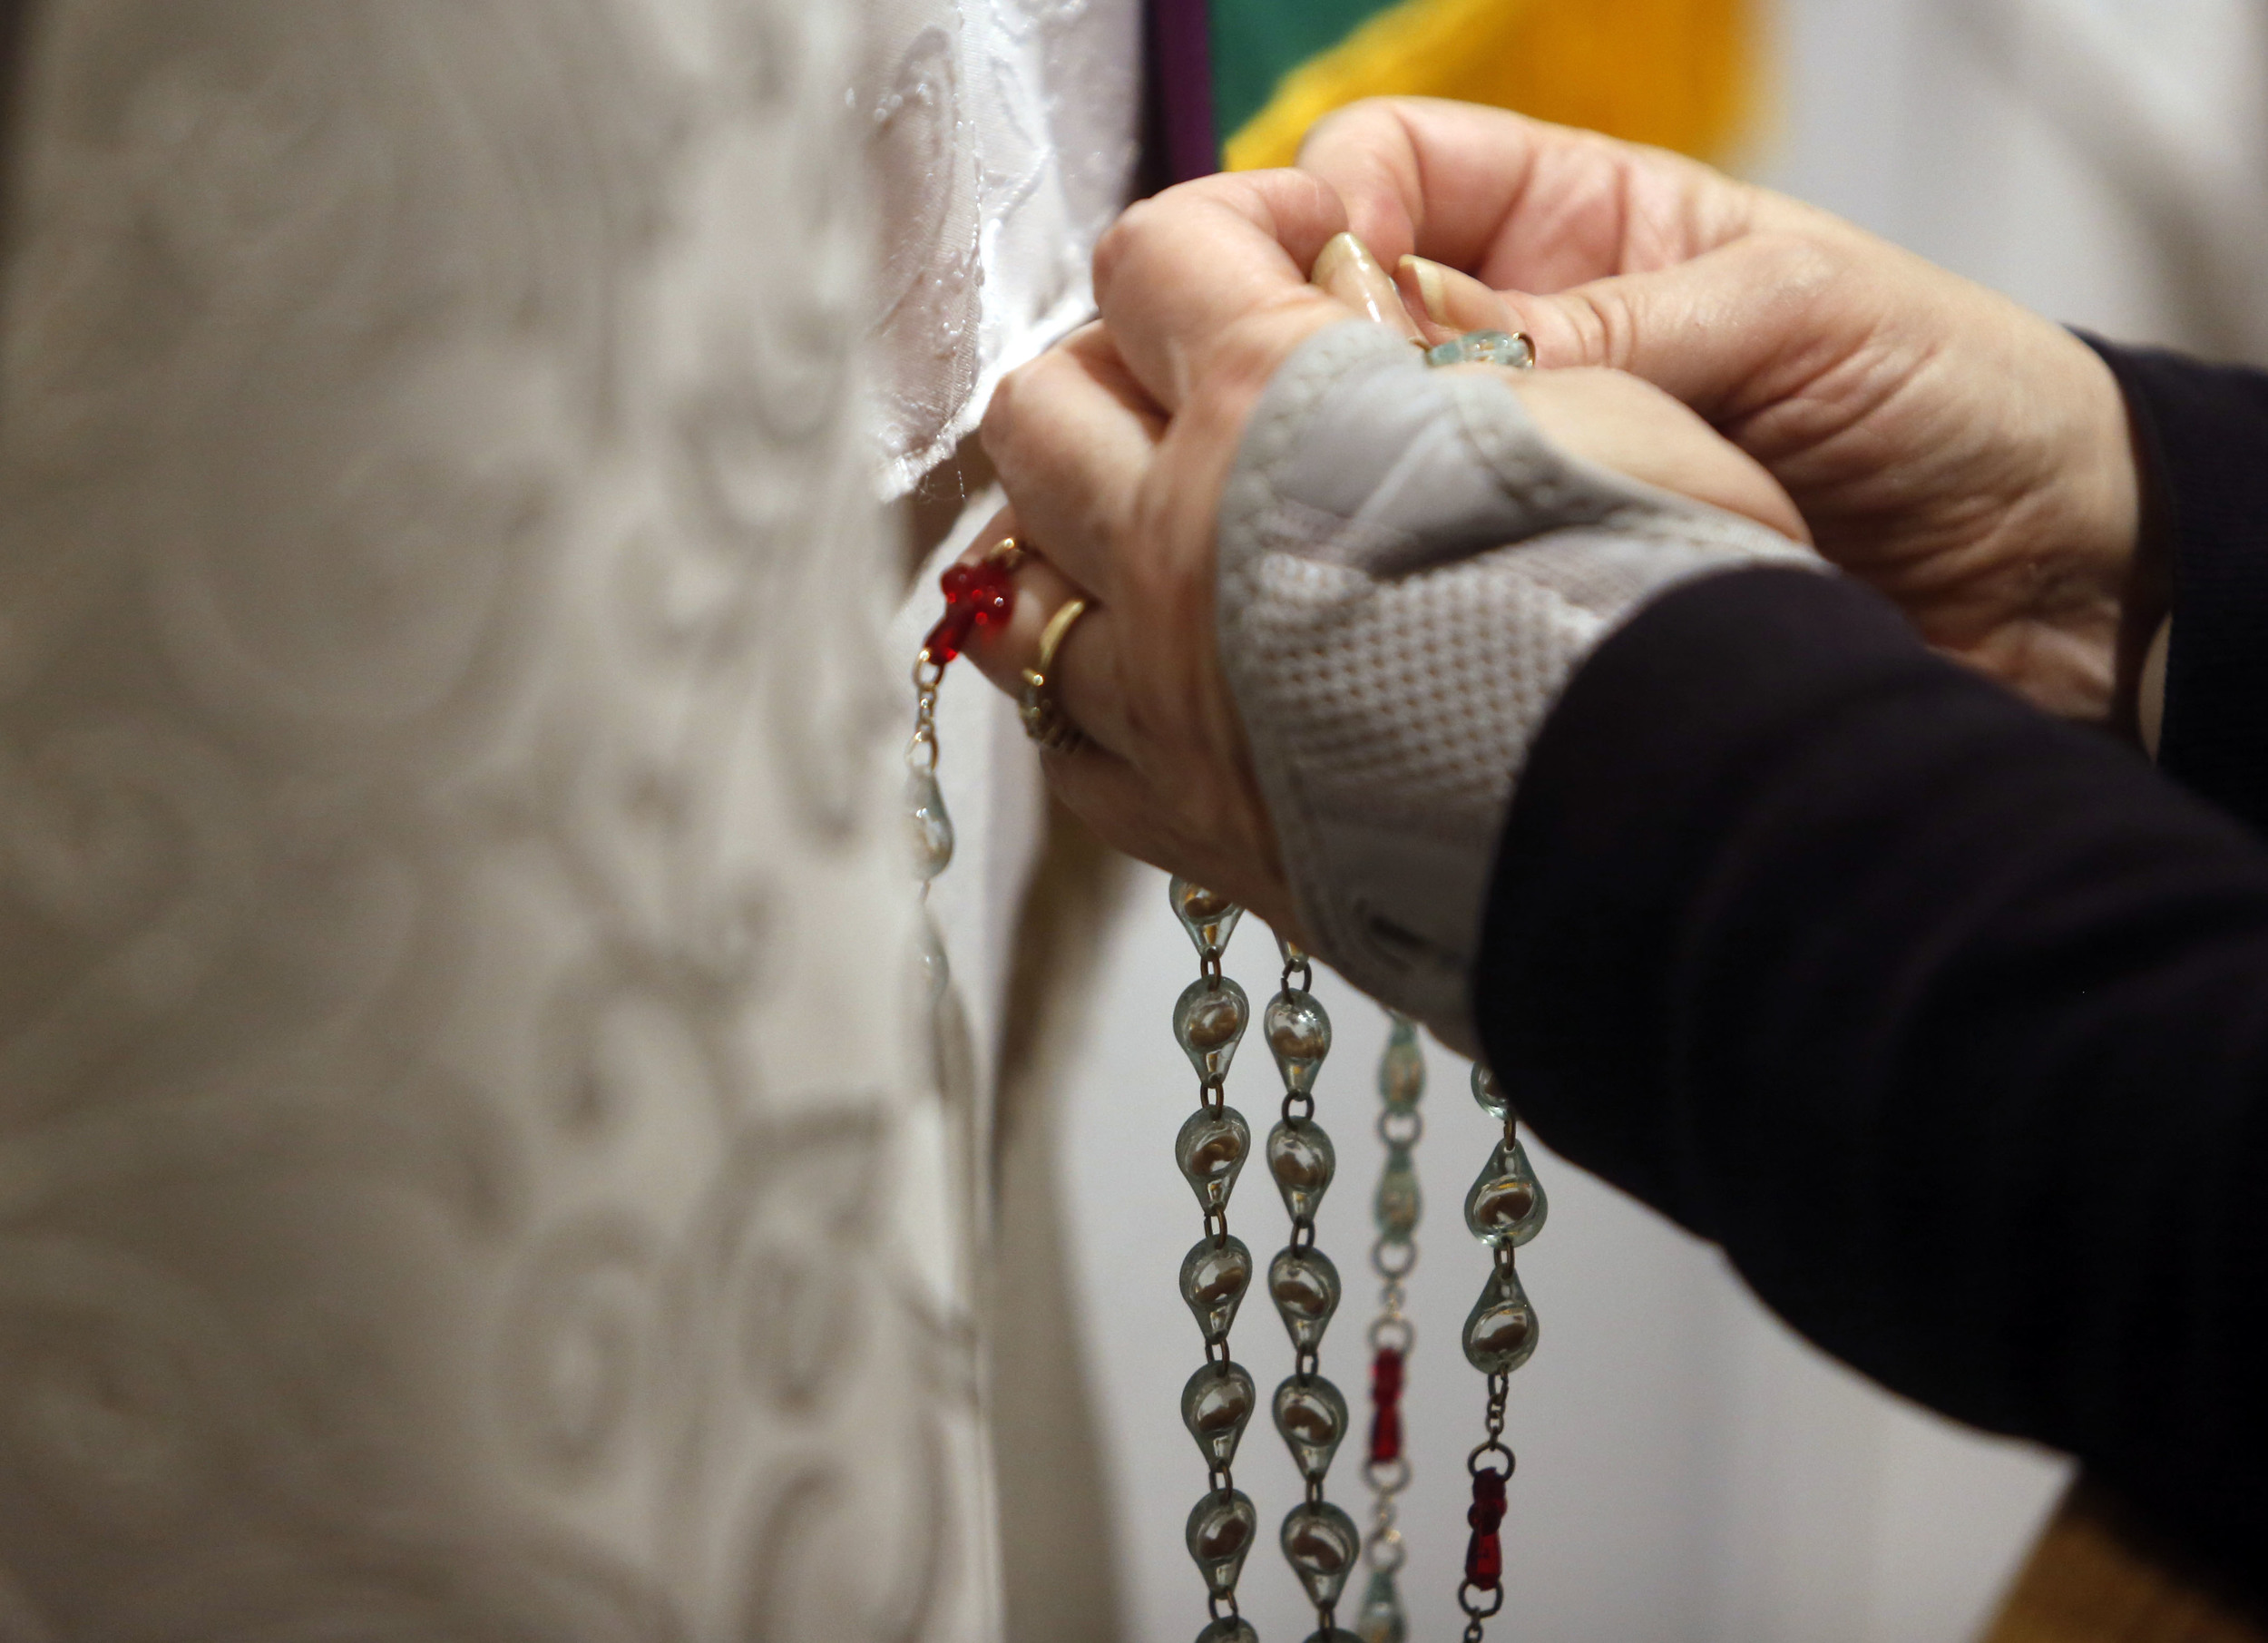   Carol LeCompte, 66, of Kennewick, holds rosary beads and prays in the perpetual adoration chapel at St. Joseph Catholic Church in Kennewick during the 2 a.m. hour.  